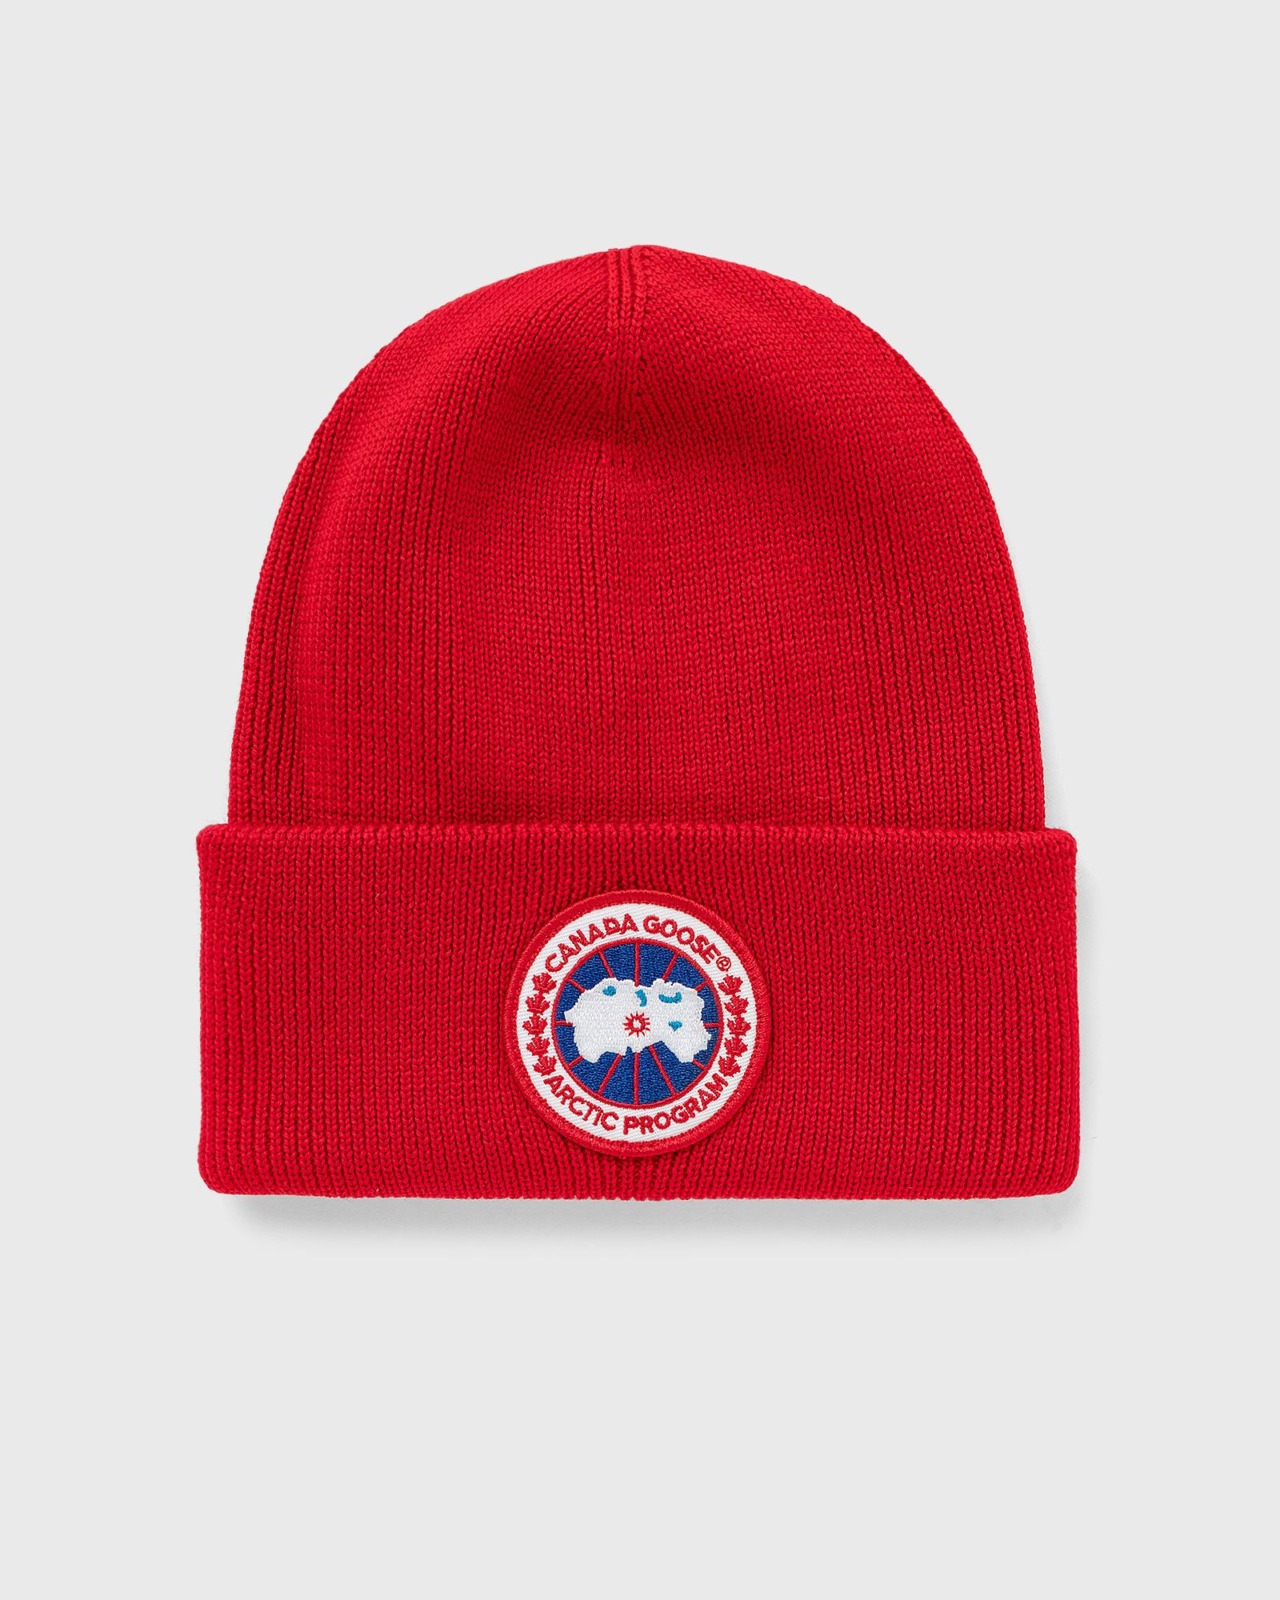 Canada Goose Red Beanie at Bstn GOOFASH